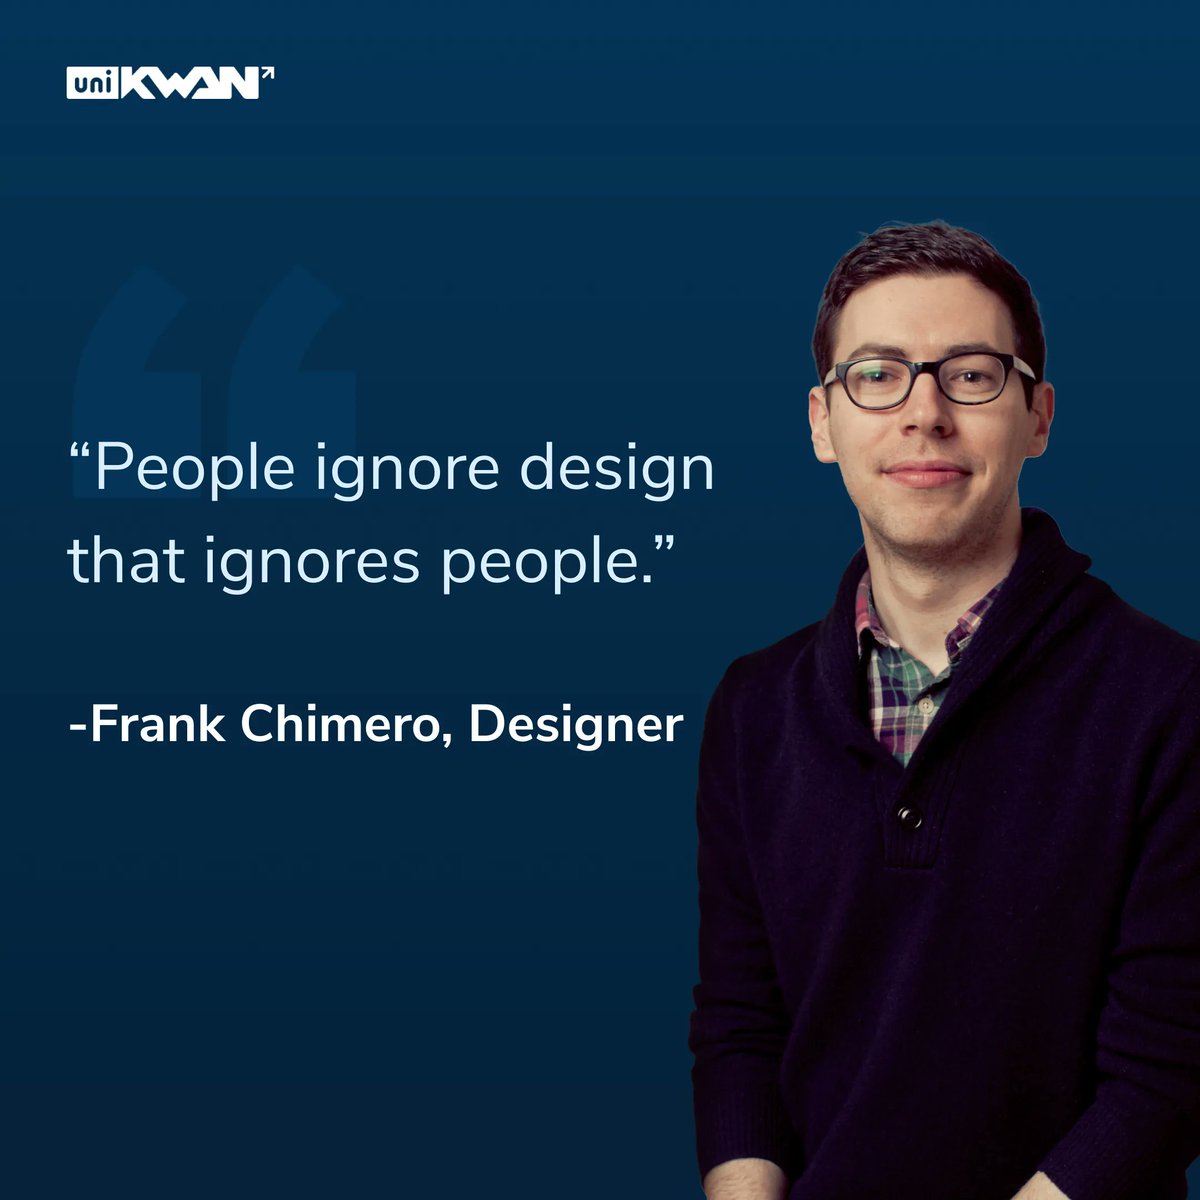 “People ignore design that ignores people.” — Frank Chimero, Designer. What are some of your favourite #design quotes? Let us know in the comments section below! Follow @UniKwan for more daily inspiration! #unikwanforux #thursdaymotivation #quoteoftheday #designagency